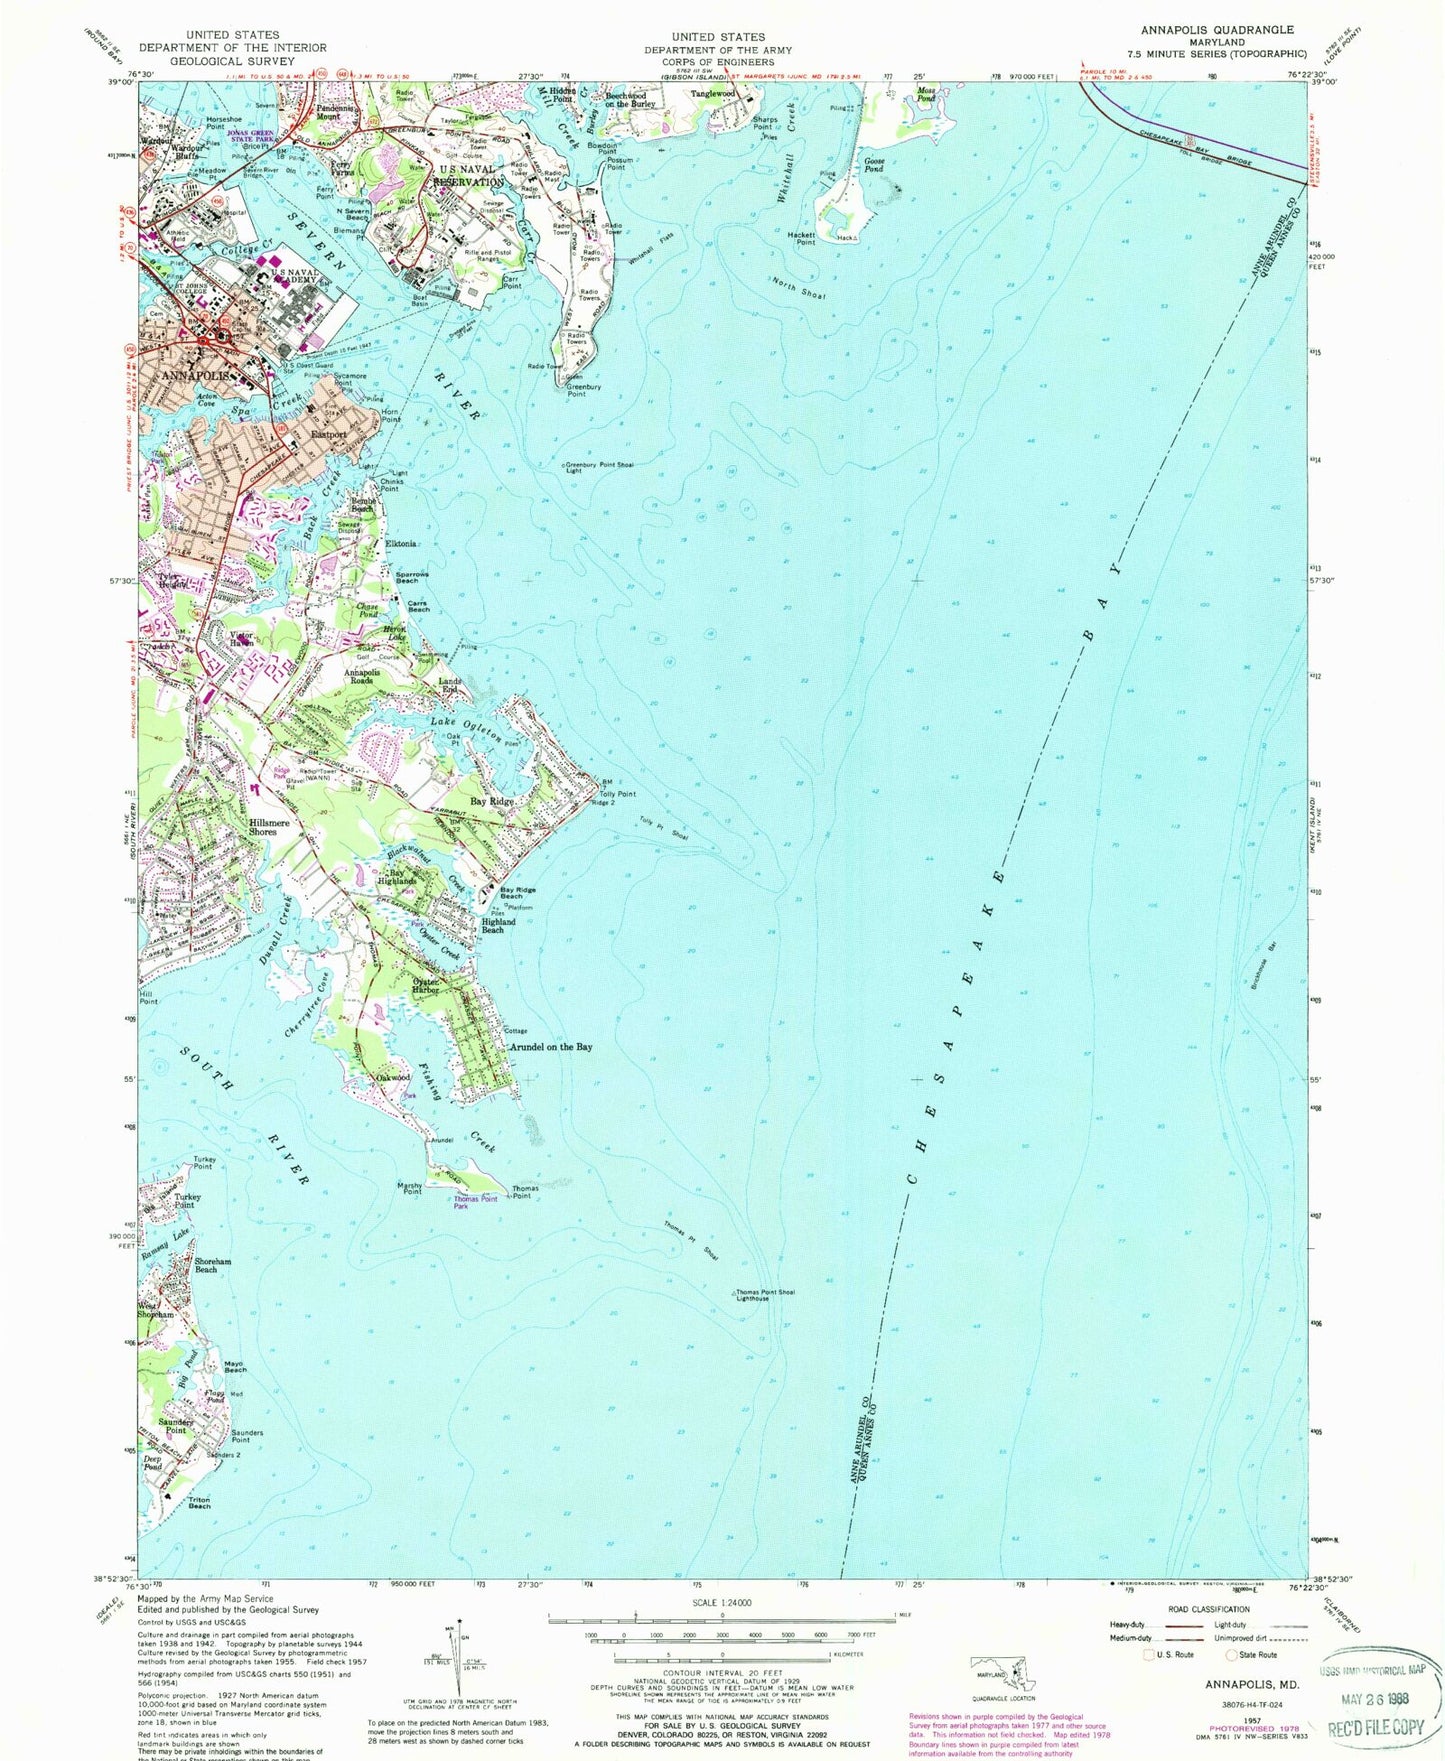 Classic USGS Annapolis Maryland 7.5'x7.5' Topo Map Image